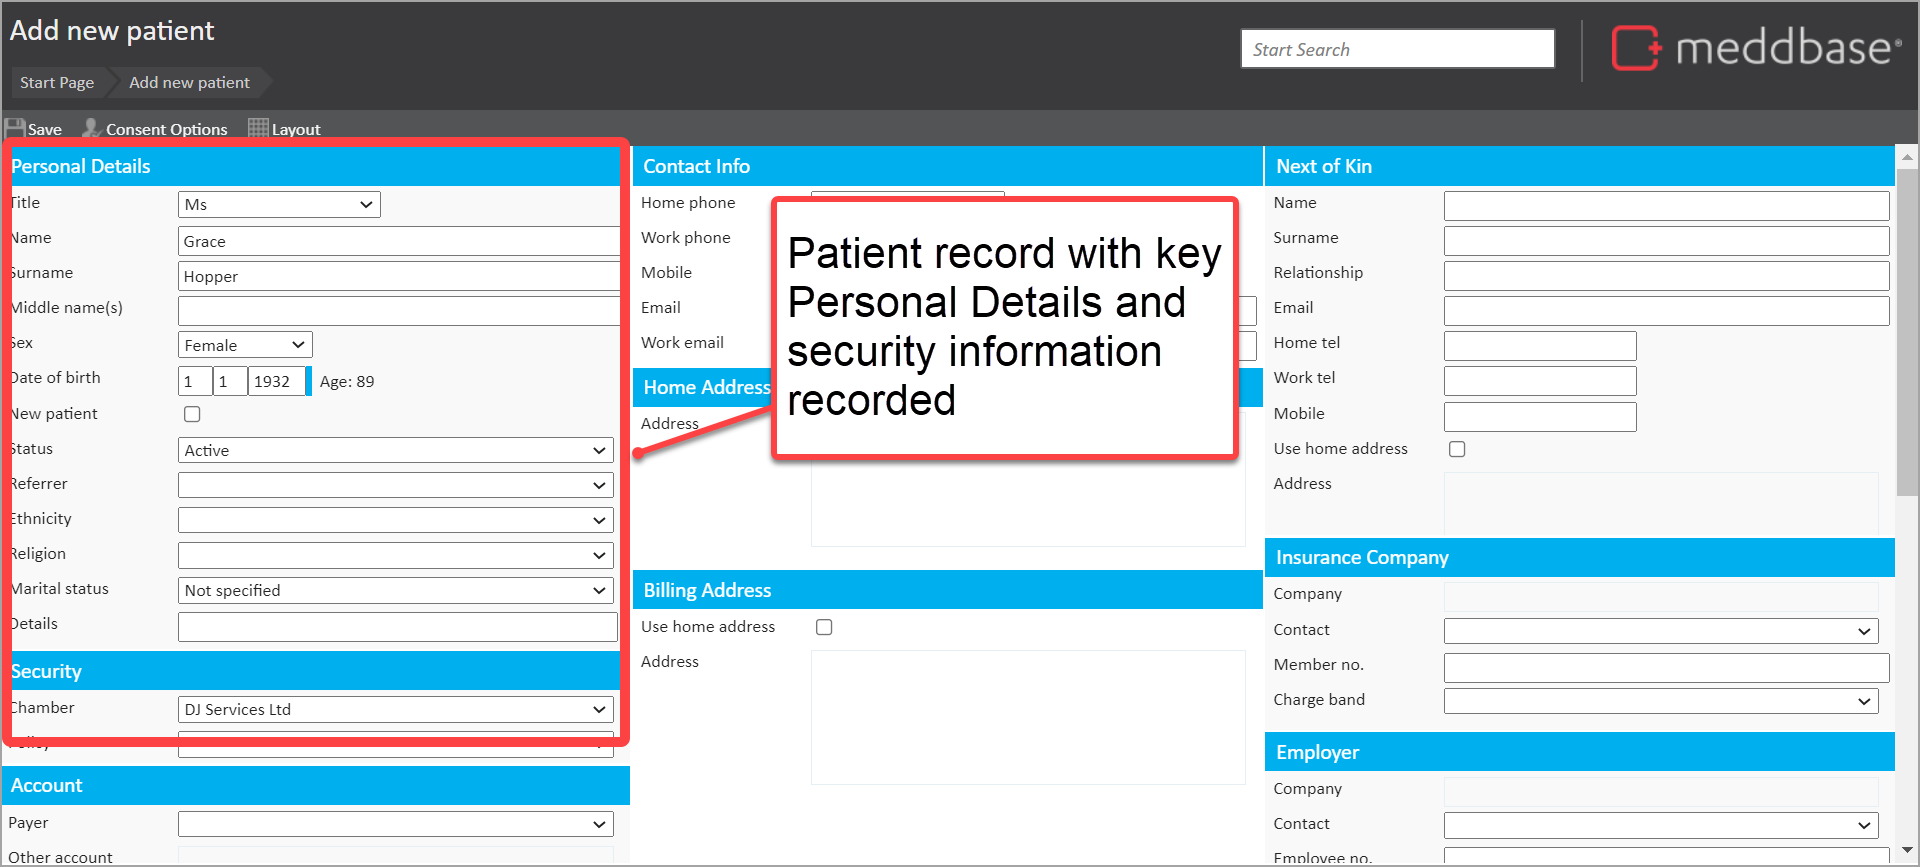 Add new patient record screen with Personal details and security information recorded